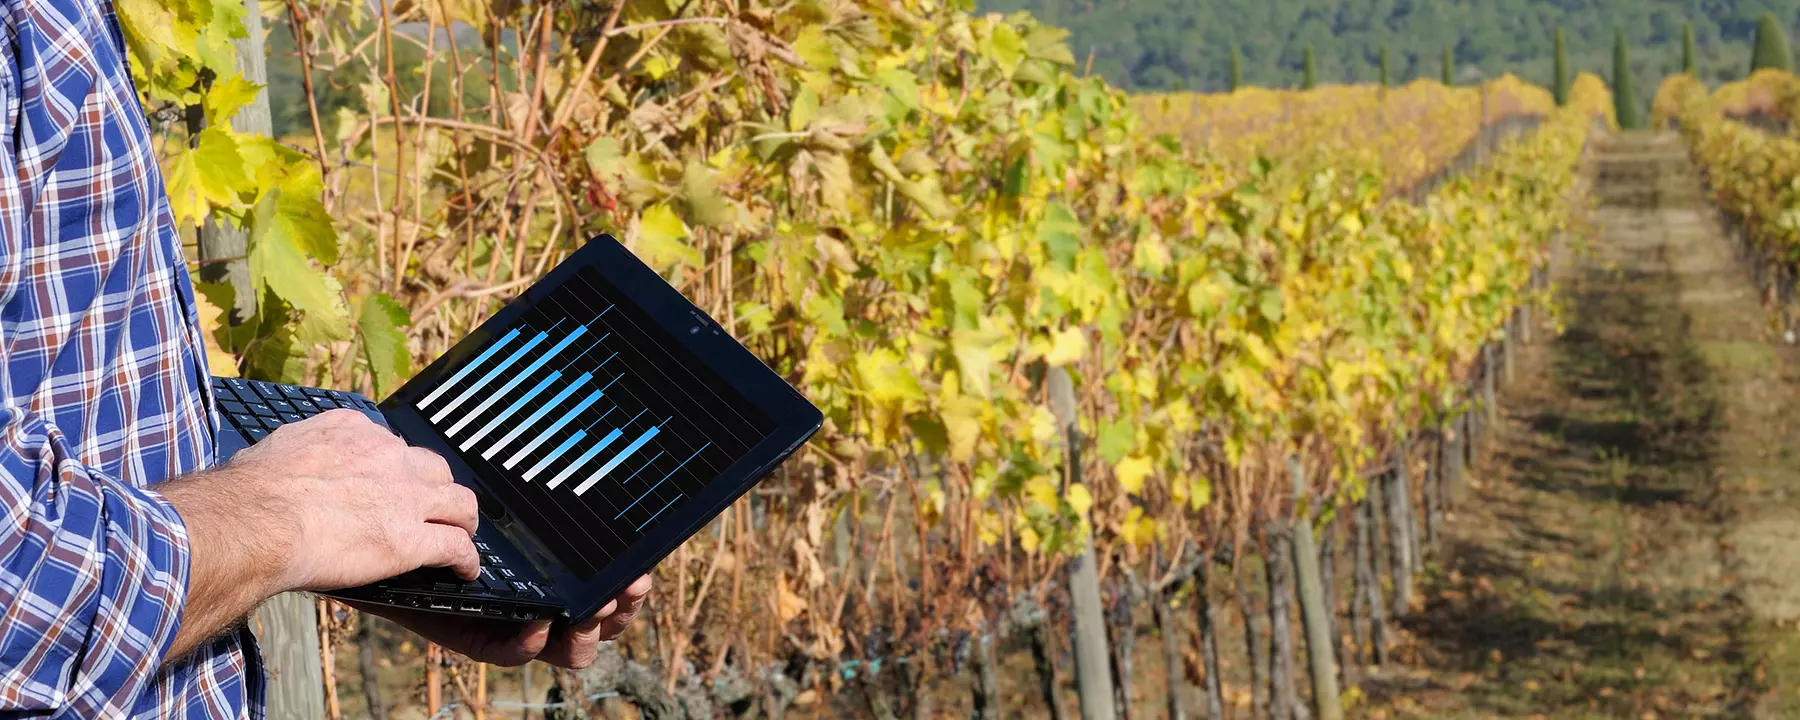 A man uses a tablet in a vineyard